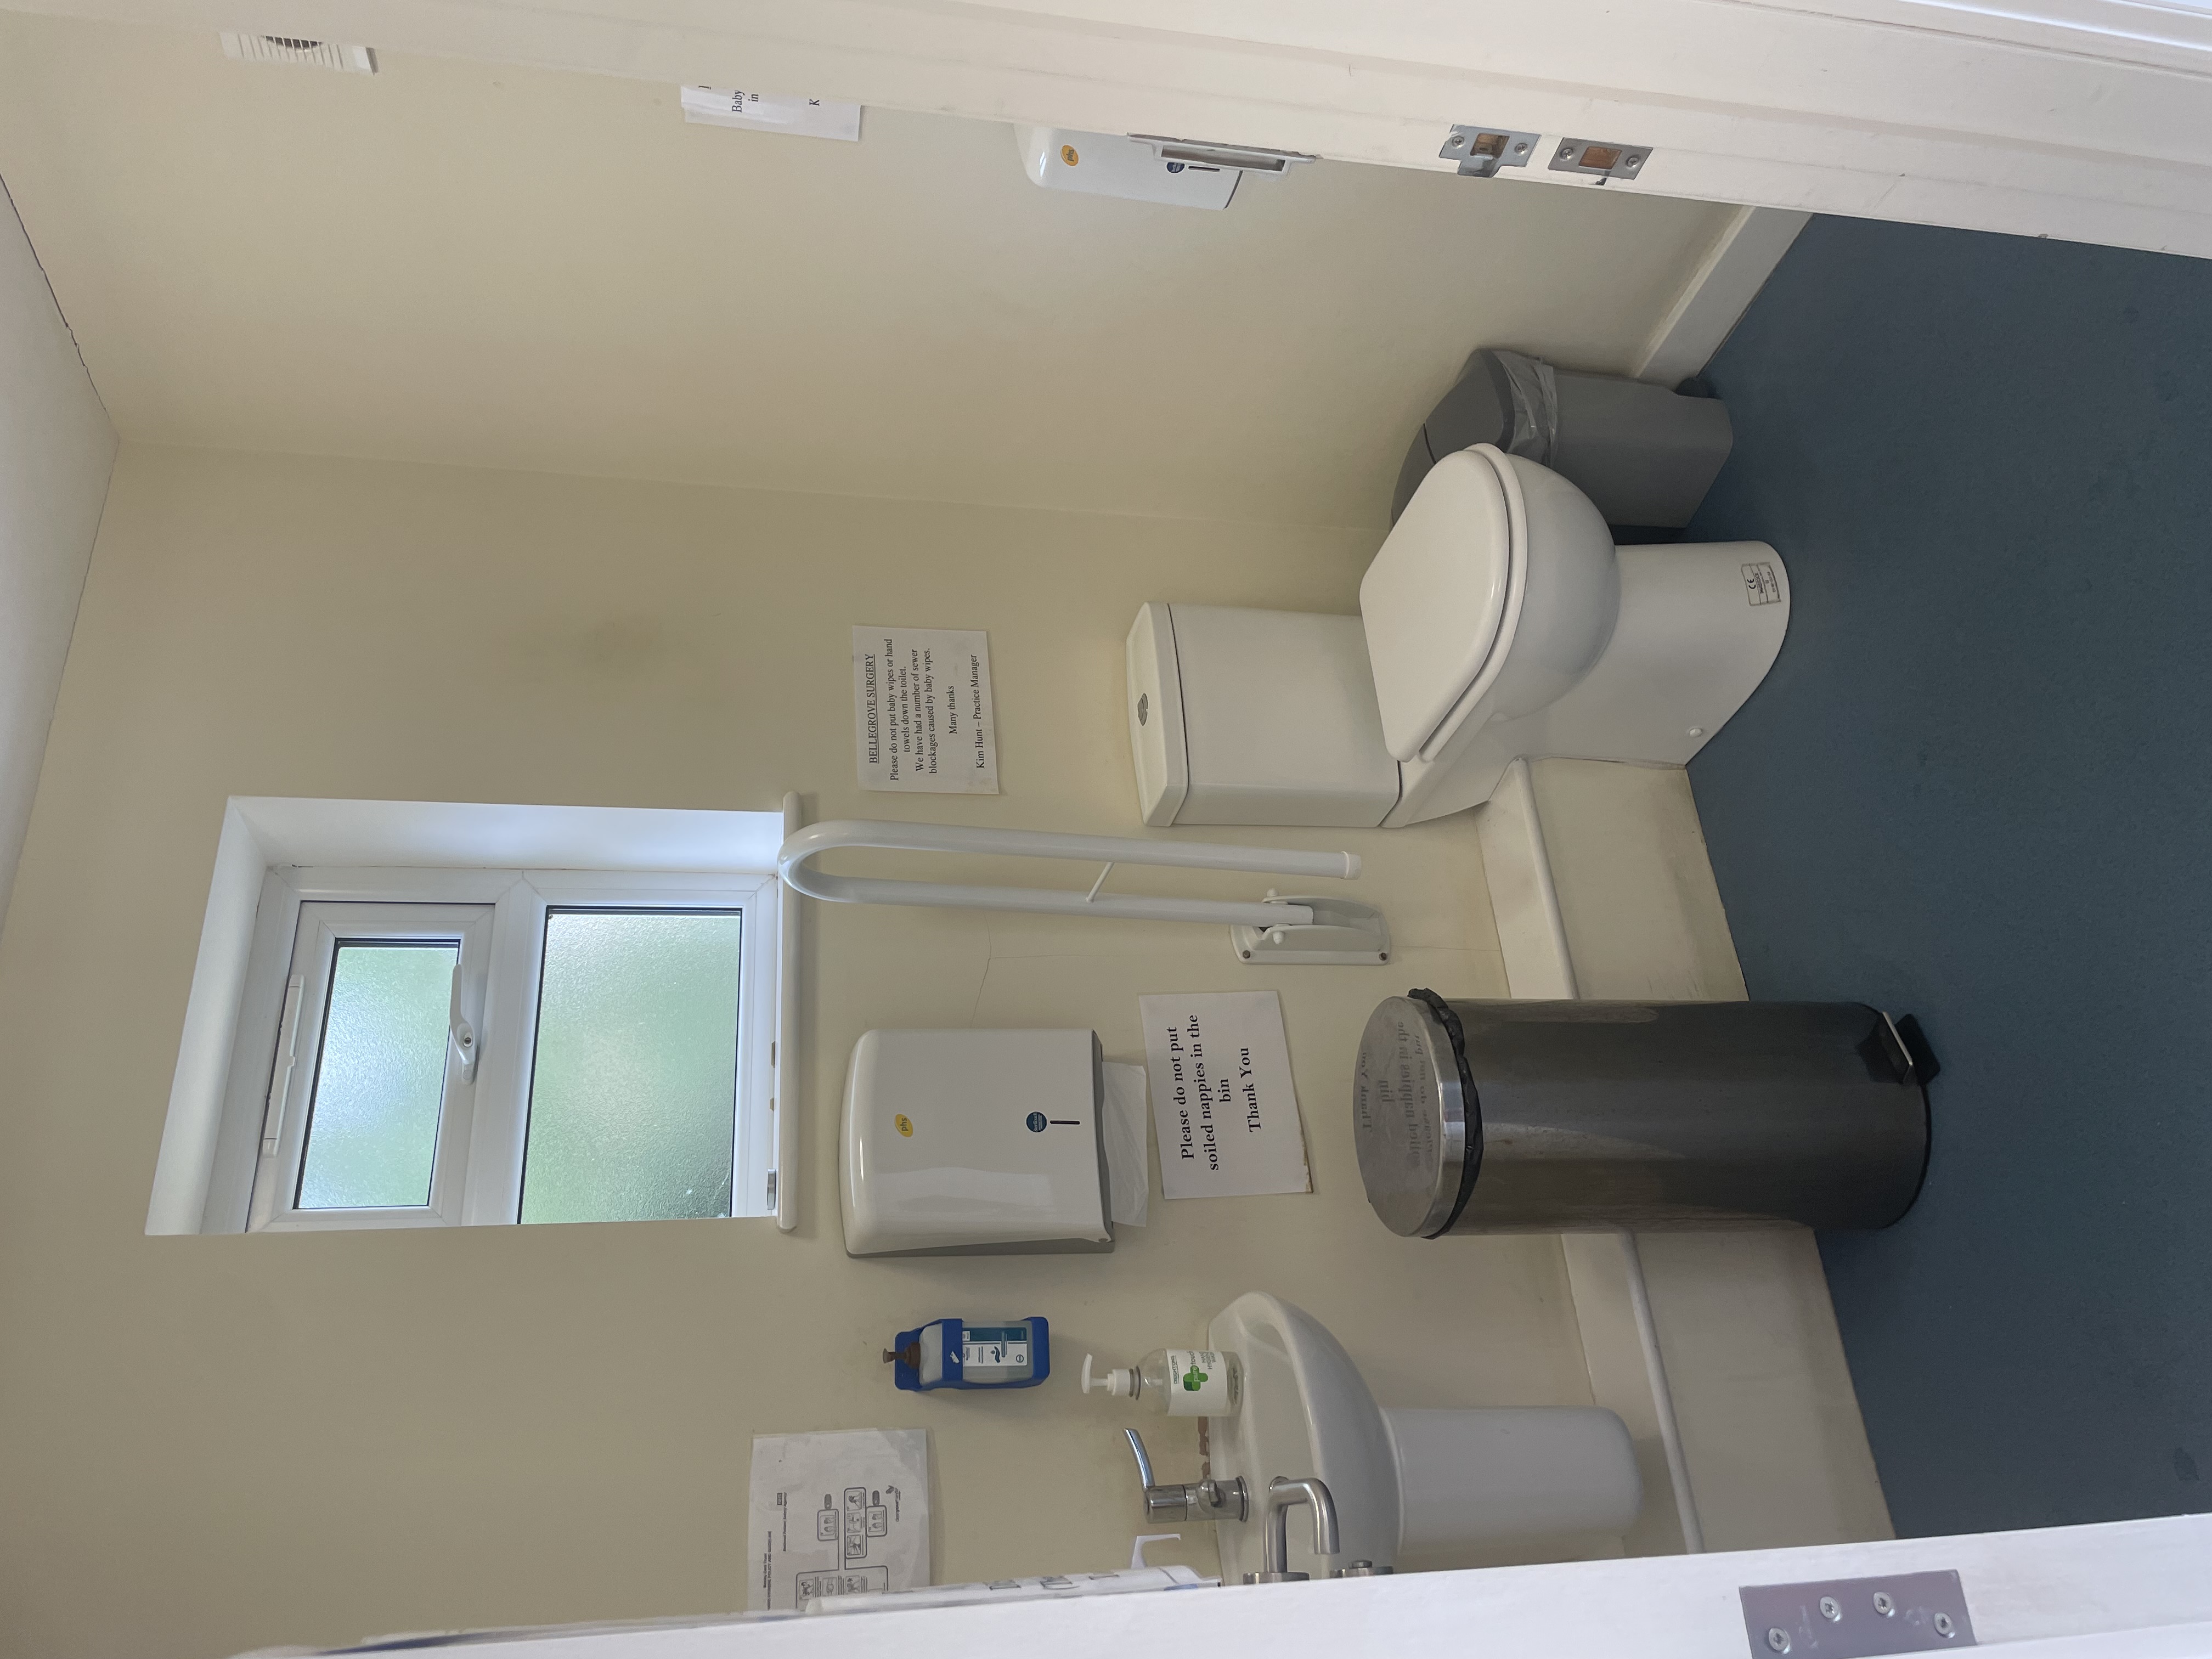 Additional Accessible Toilet